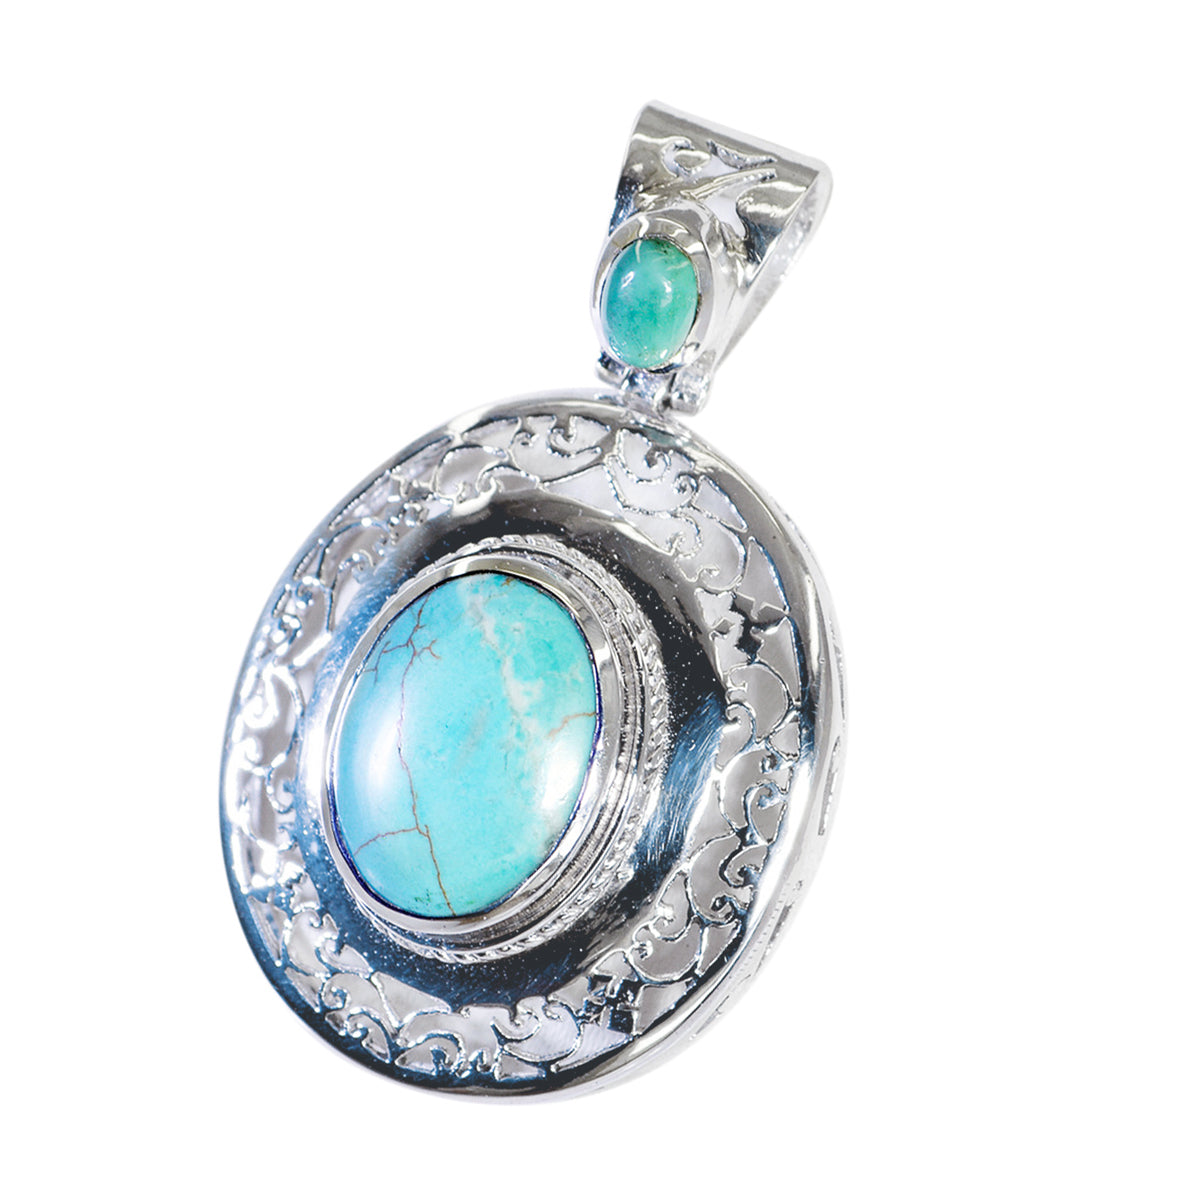 Riyo Gorgeous Gems Oval Cabochon Blue Turquoise Solid Silver Pendant Gift For Good Friday